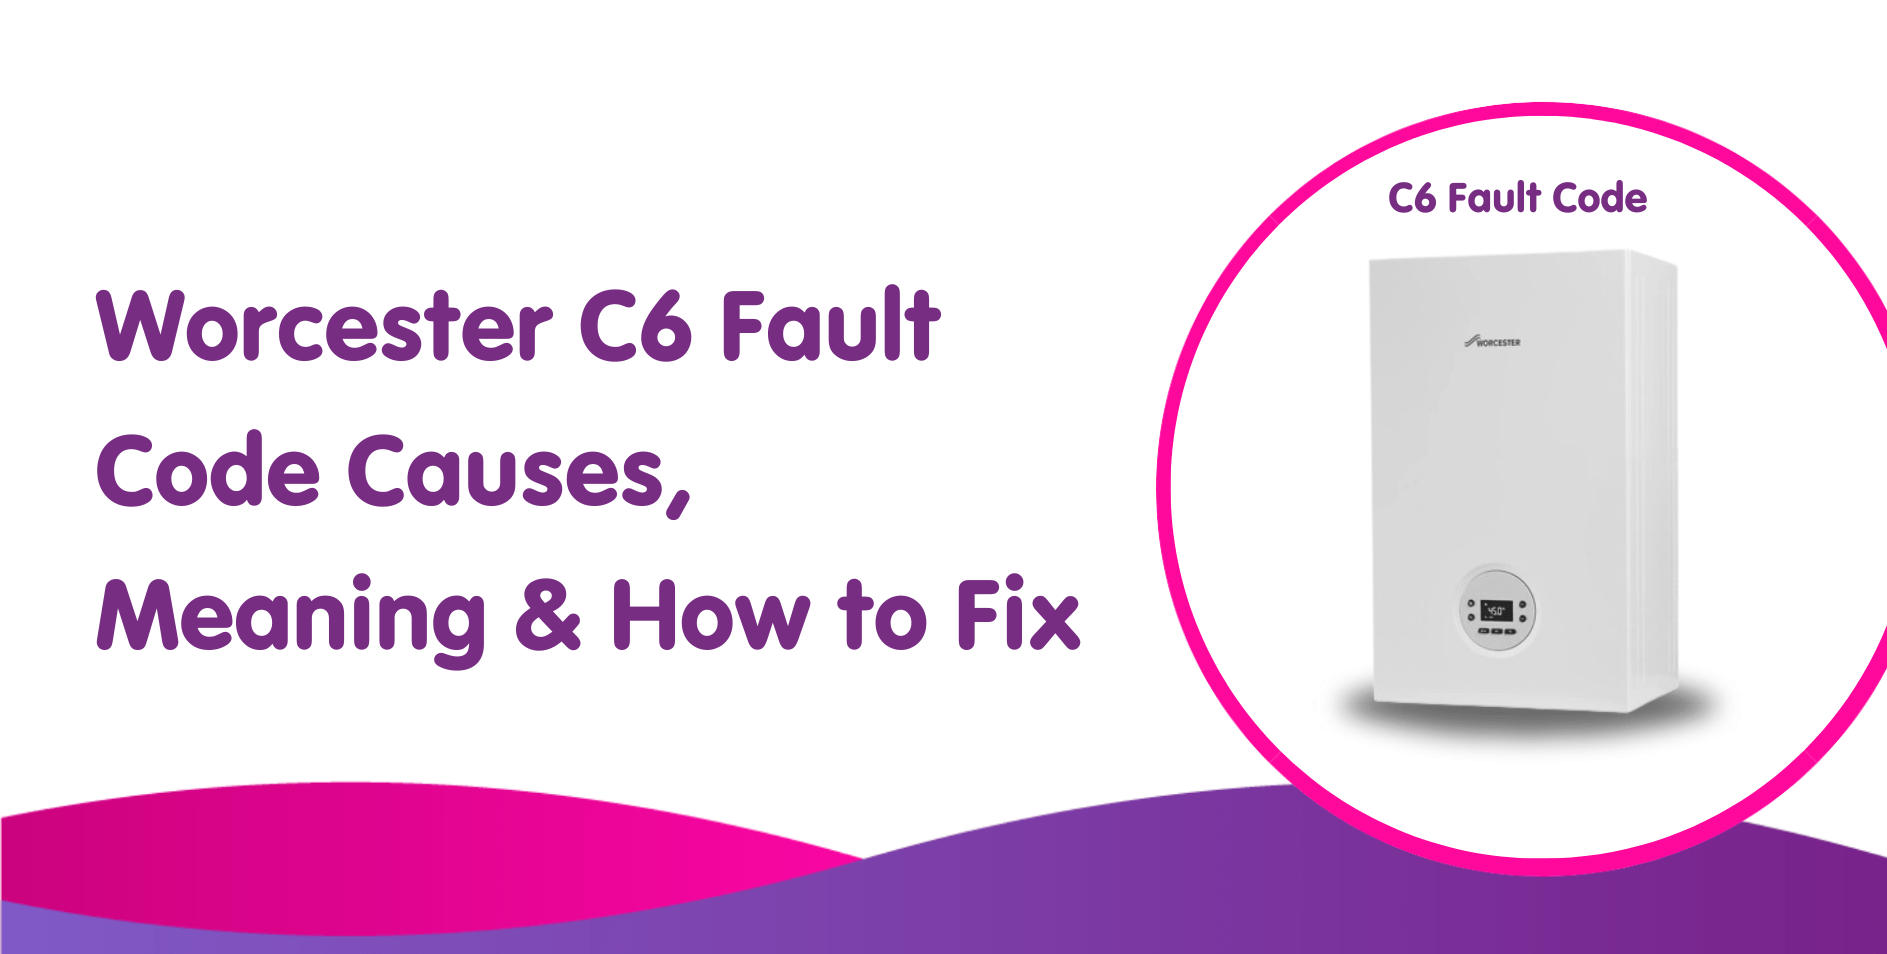 Worcester C6 Fault Code Causes, Meaning & How to Fix